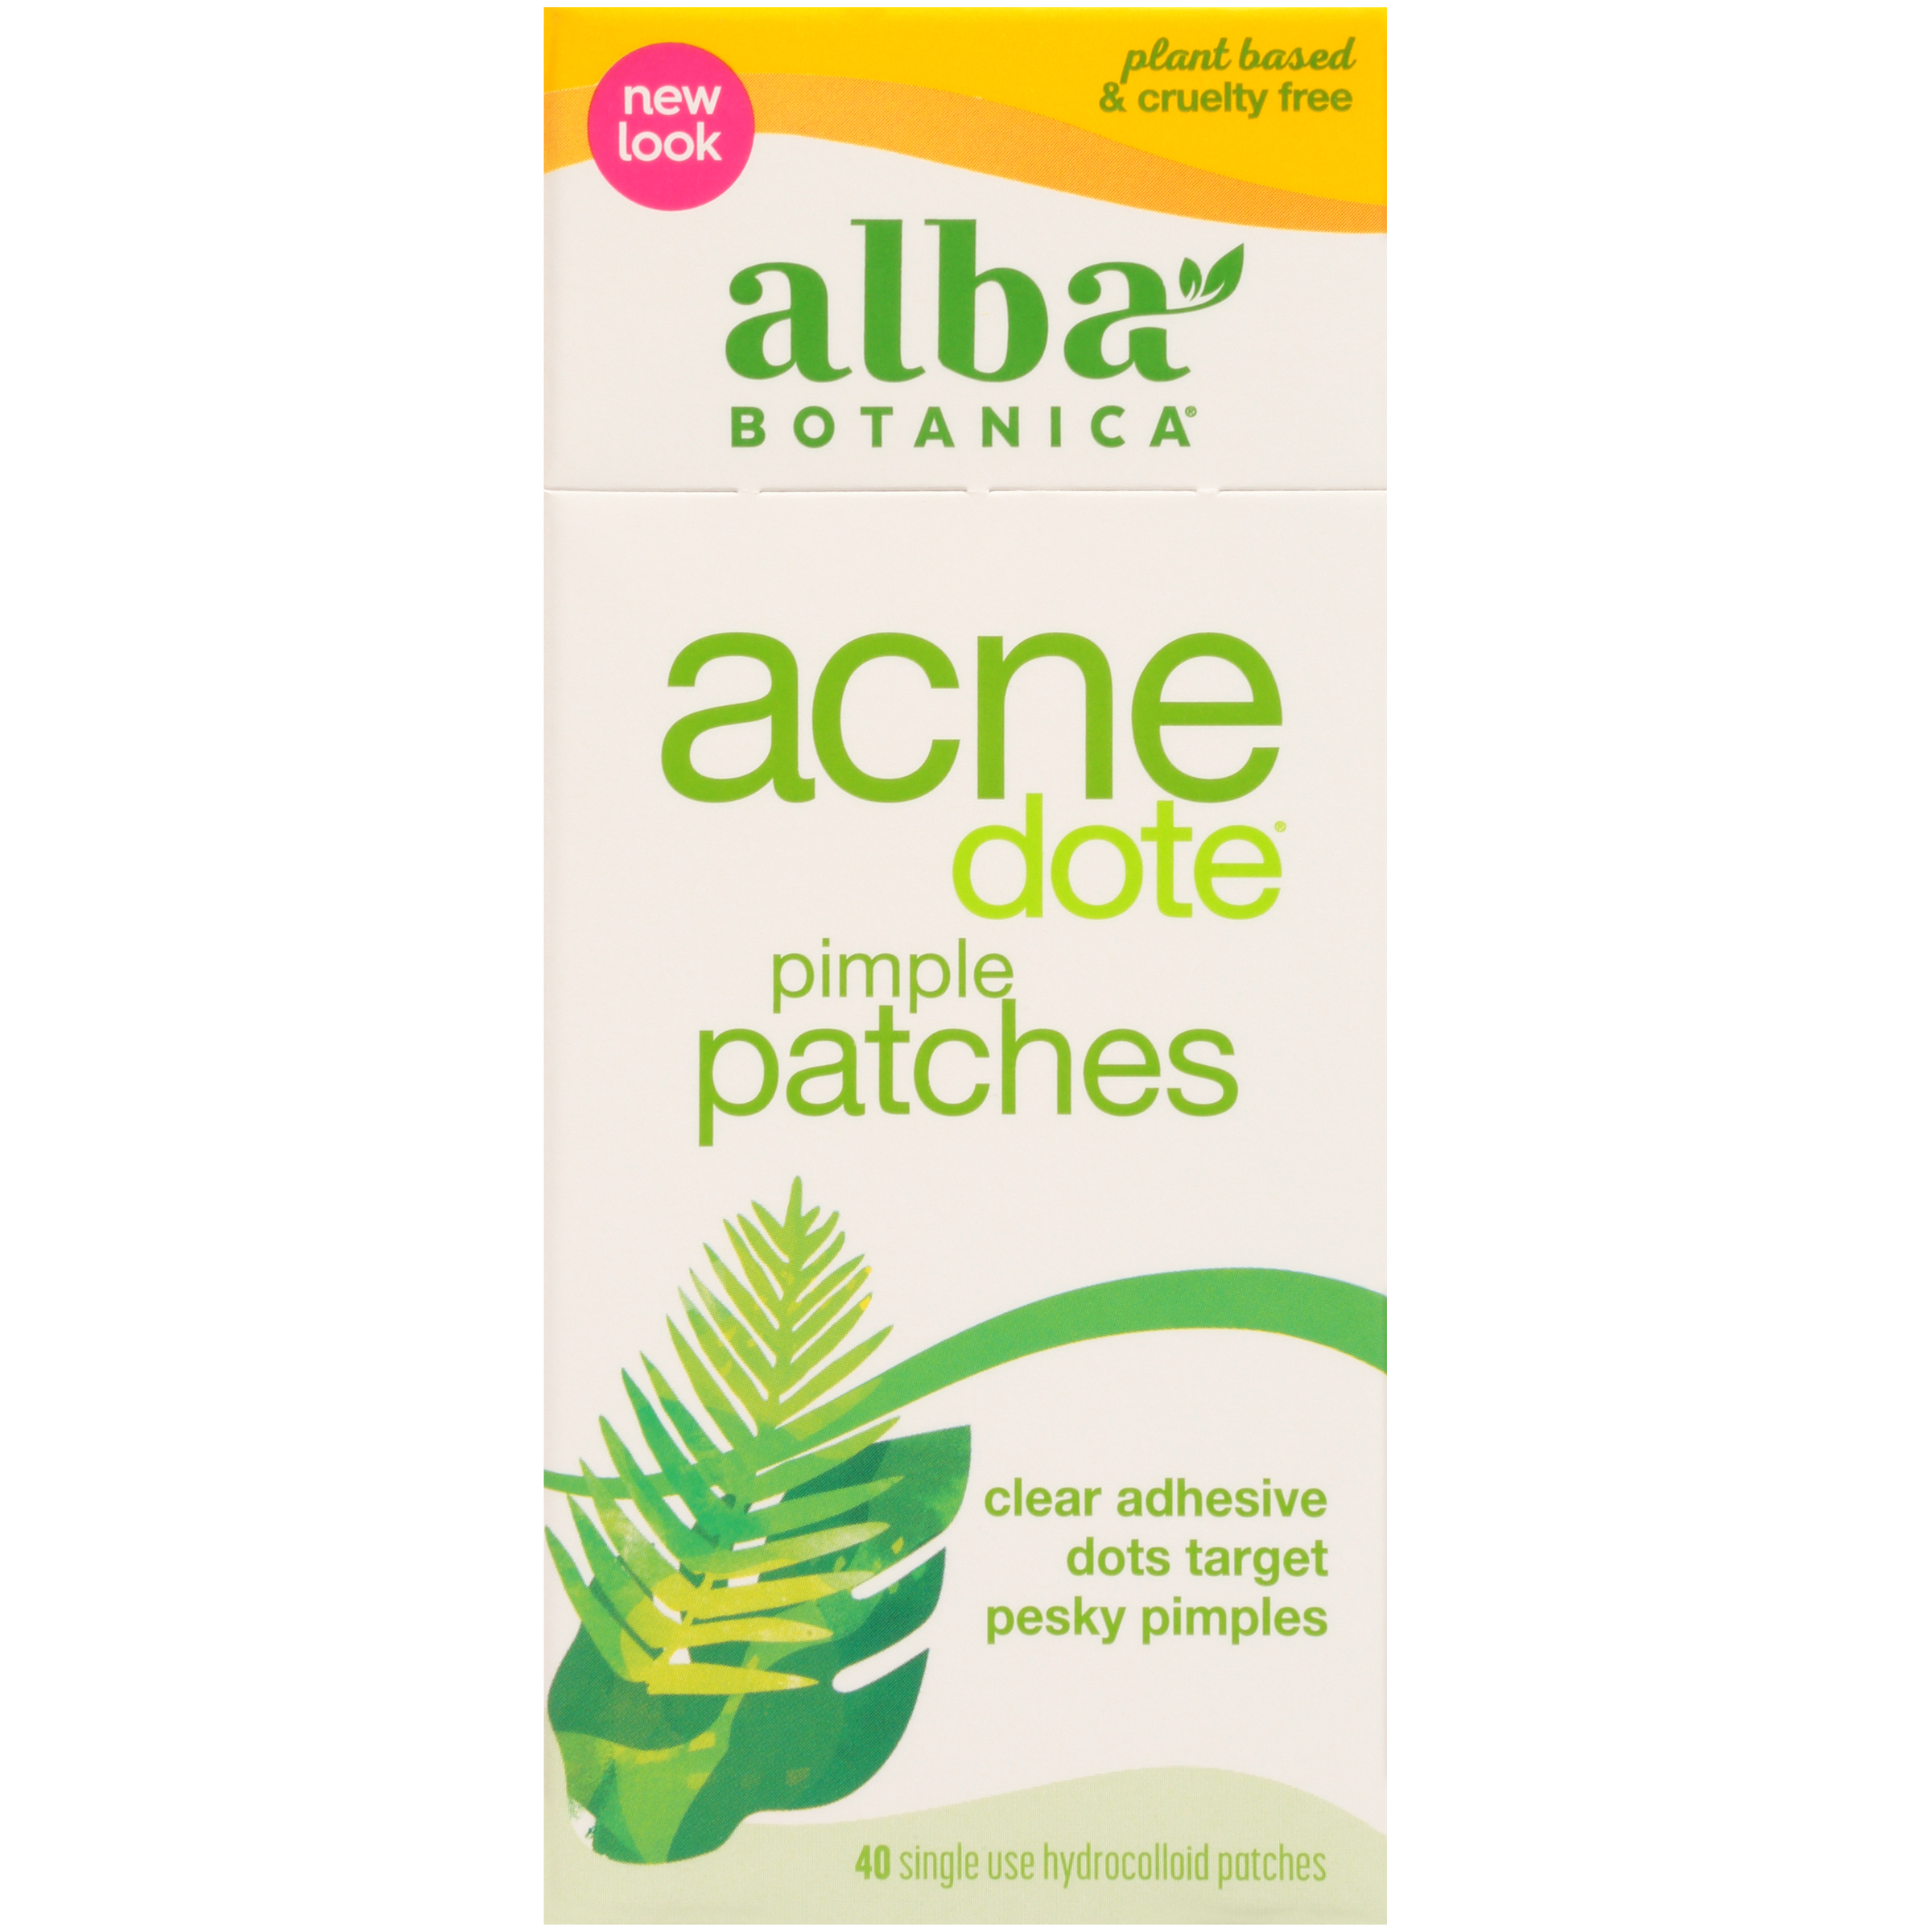 Alba Botanica Acnedote Pimple Patches, 40 count - image 1 of 10